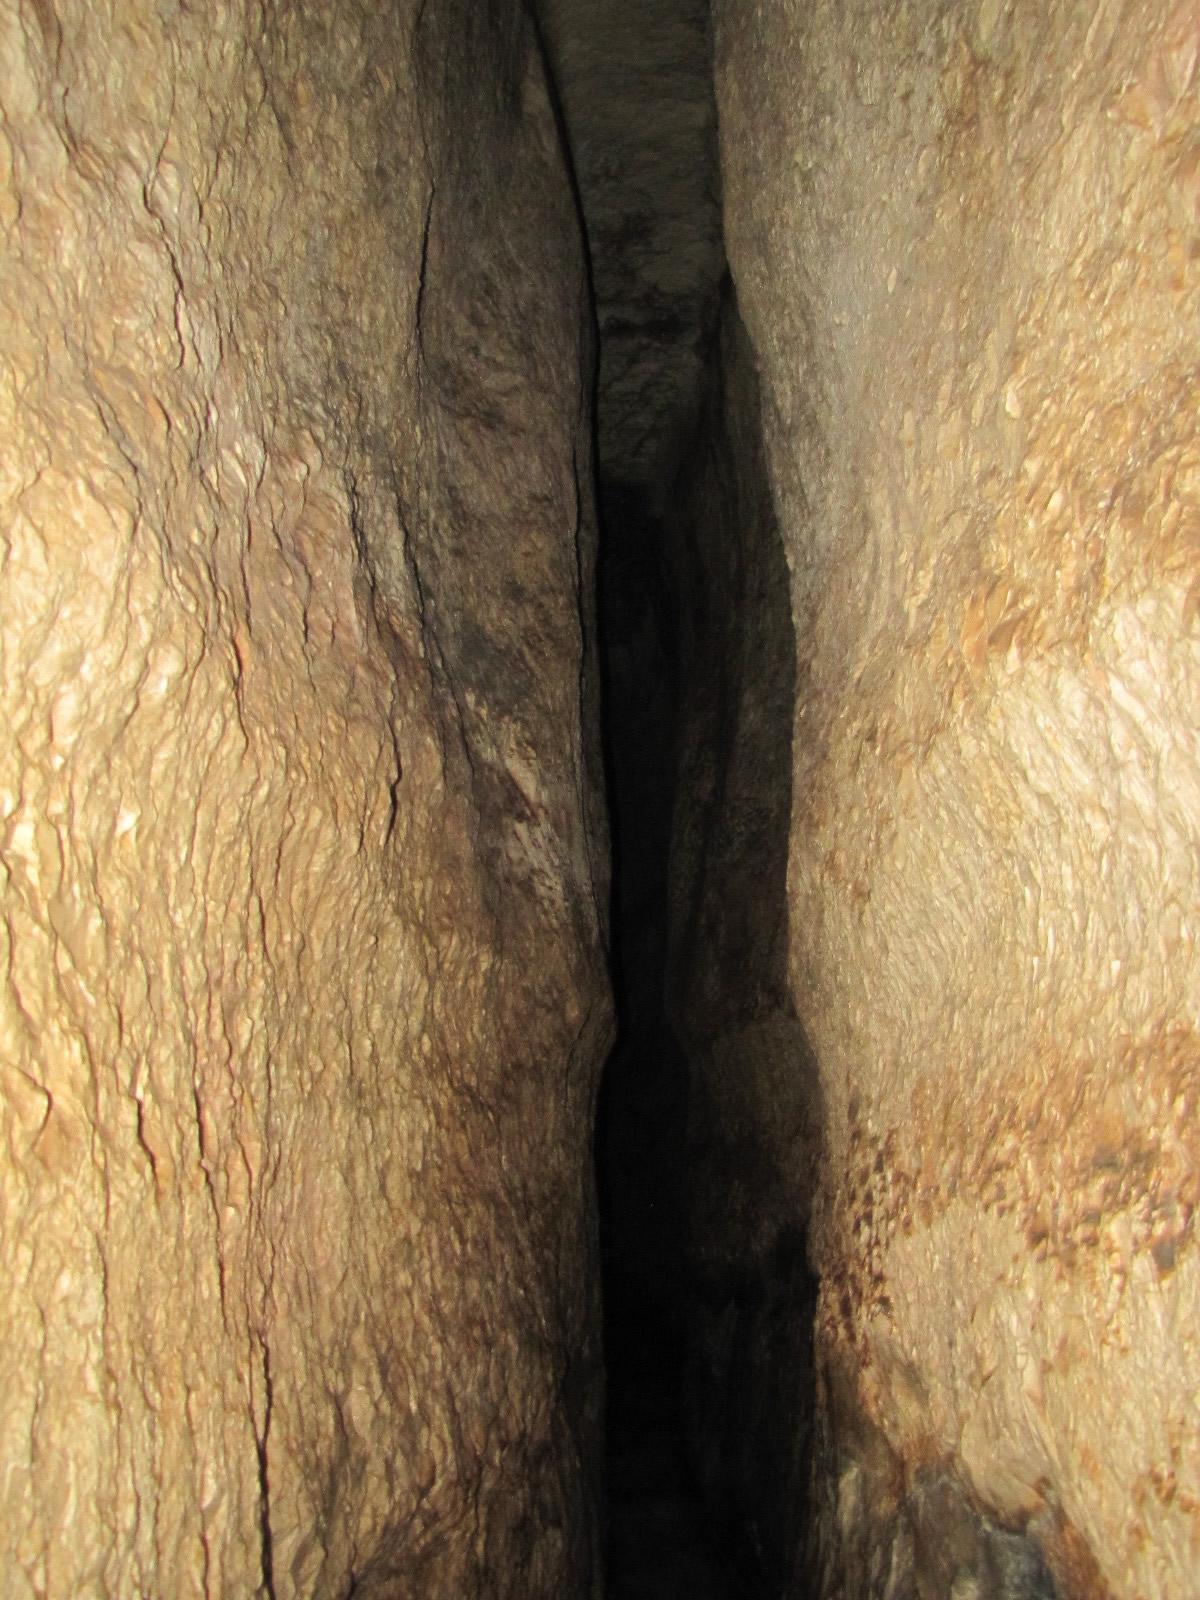 Ceiling 19 foot, nineteen feet, high near end, second half, of Hezekiah's Tunnel, make room for Sluice Gate